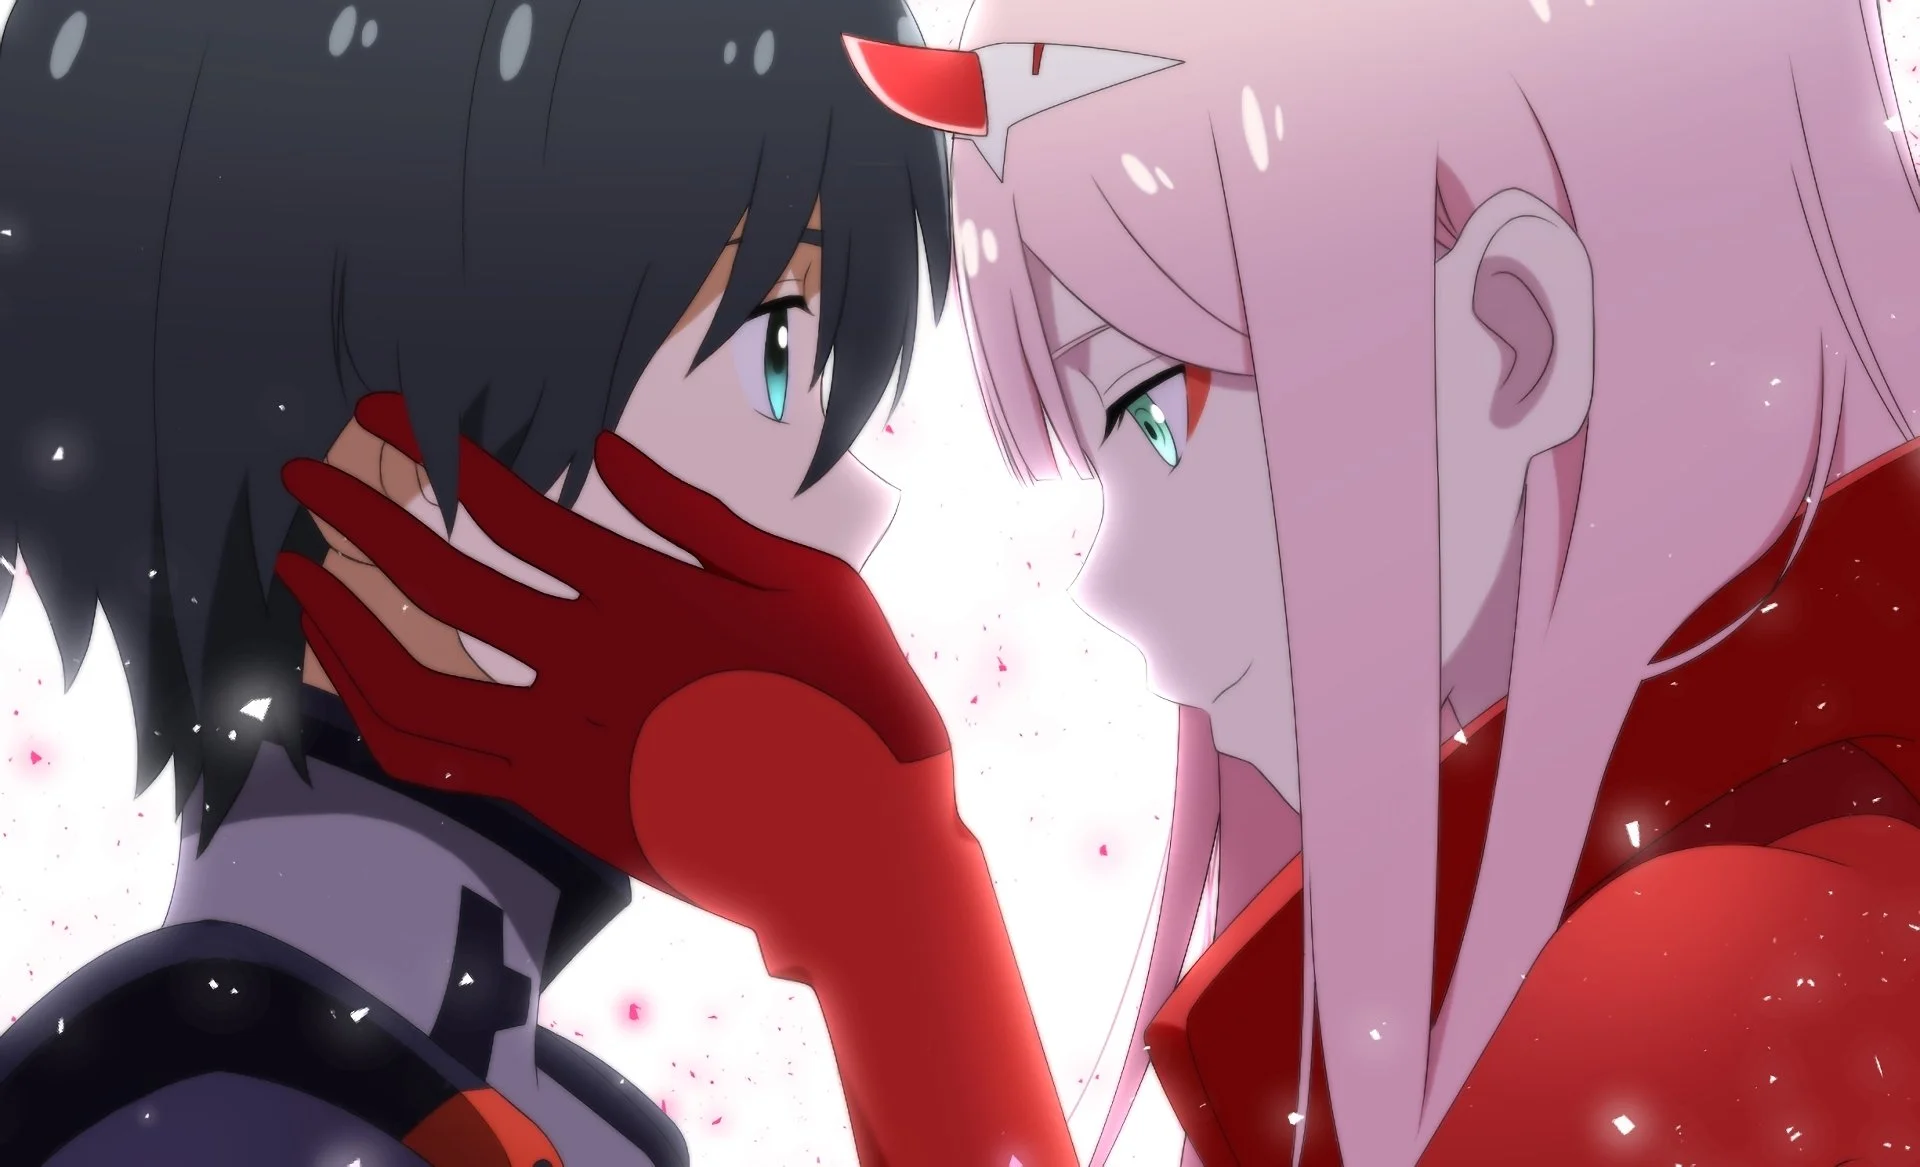 Darling in the FranXX season 2 WILL YOU HAVE? - Anime Darling in the FranXX  season 2 release date? 